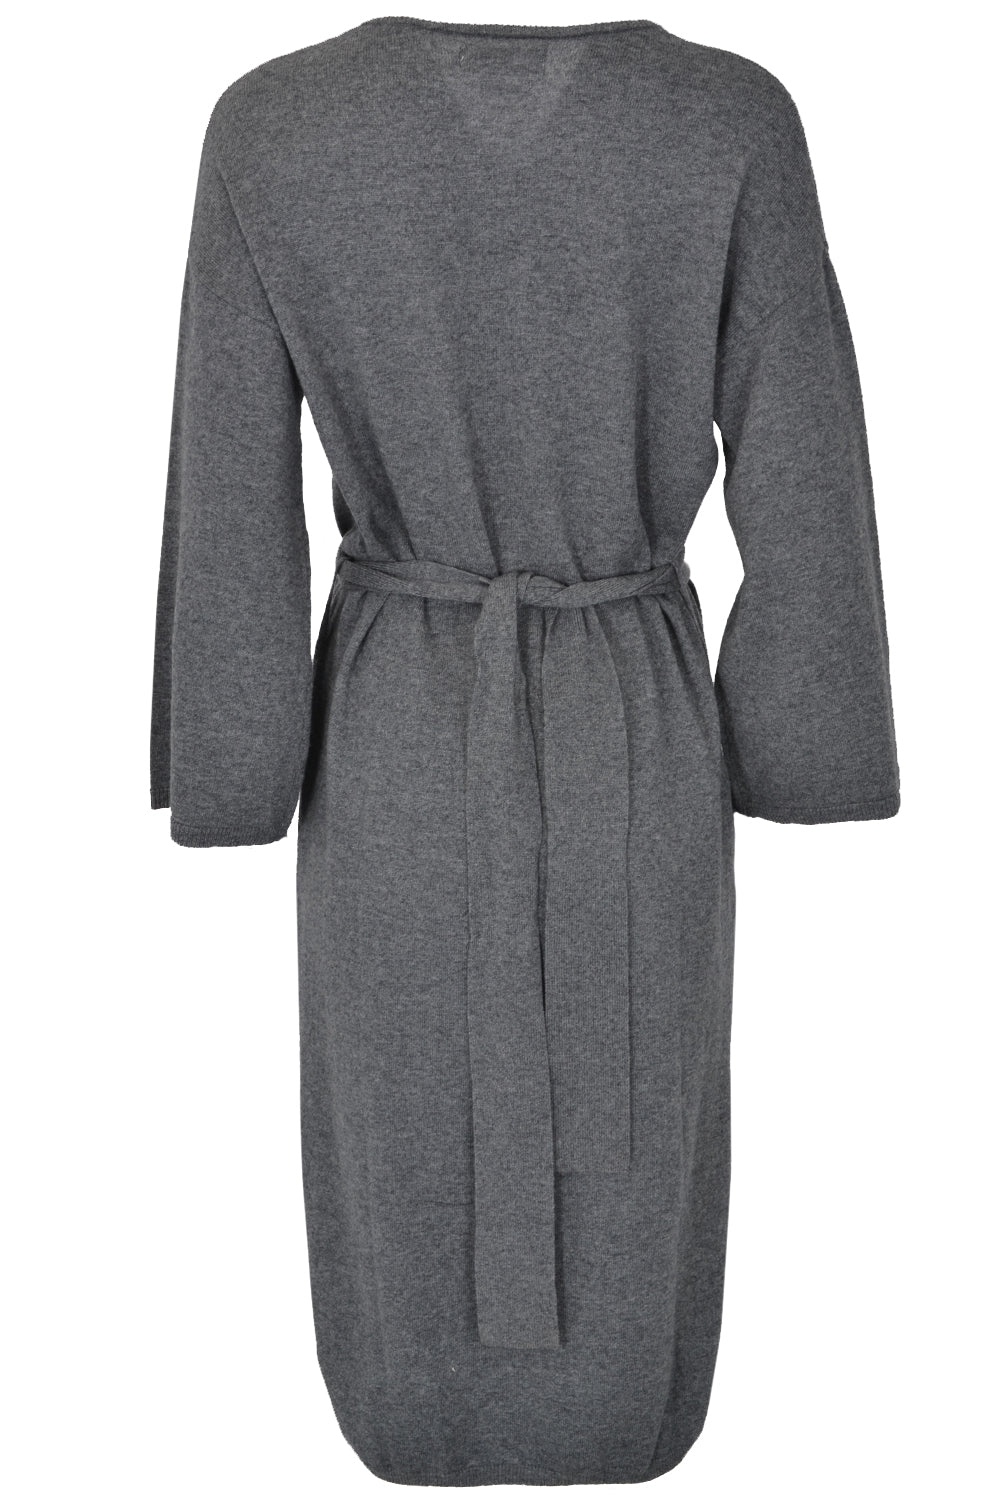 Not Shy 3703025 Grey Sweater Dress with Belt Anthracite - Sub Couture